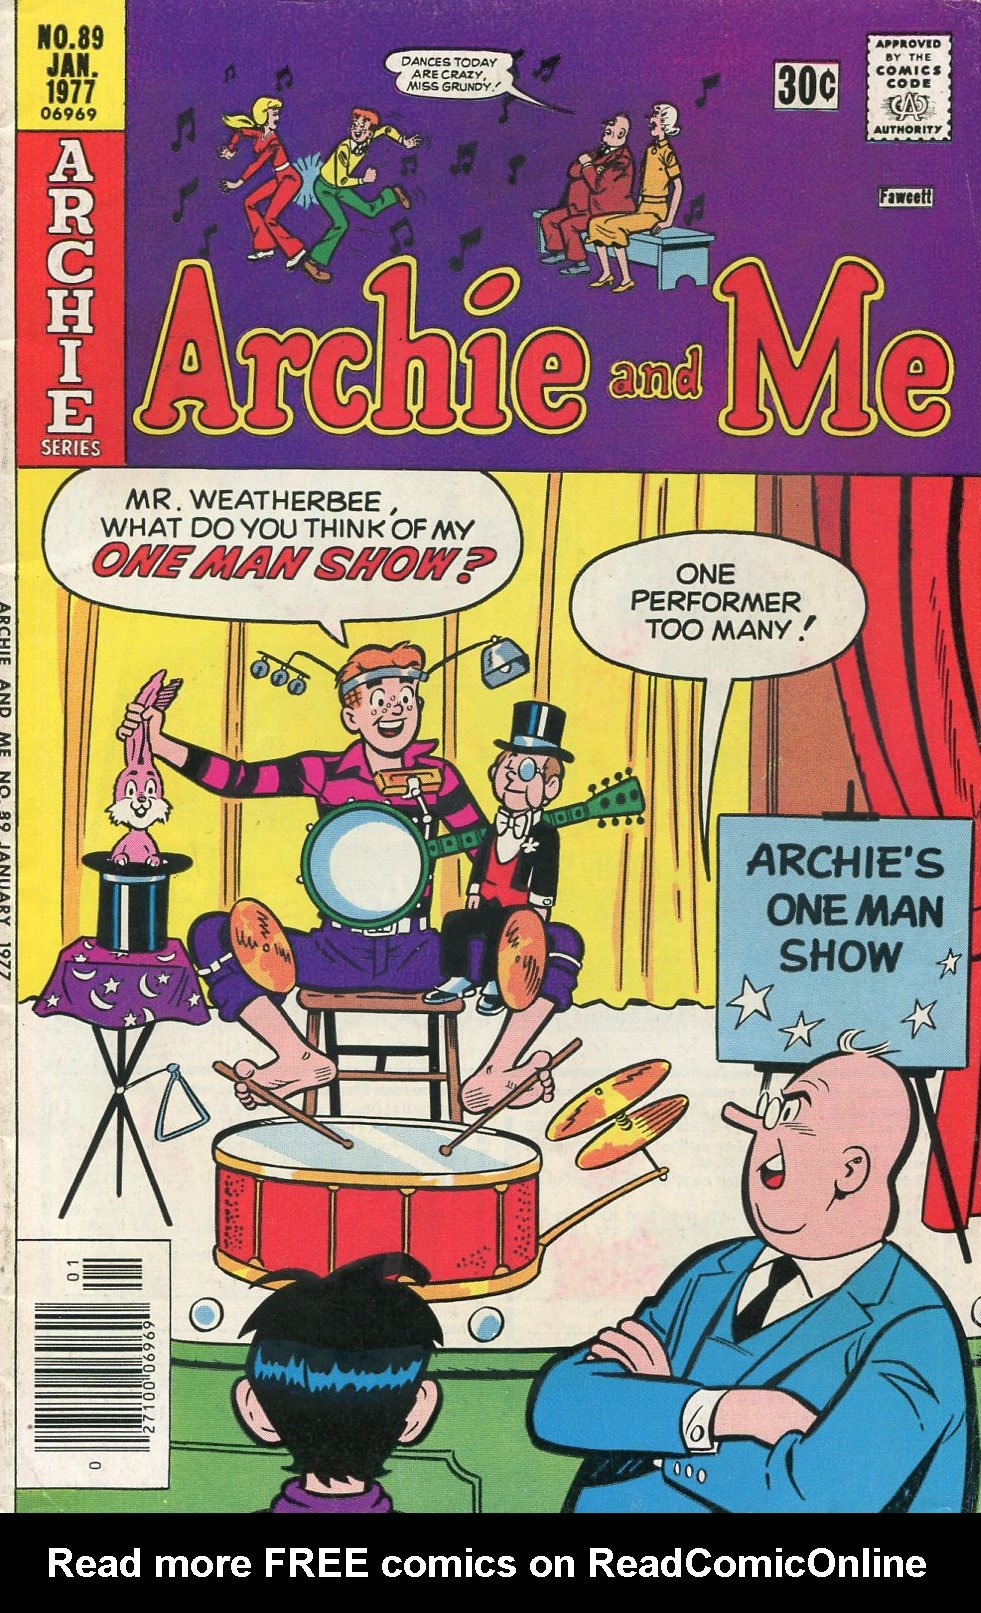 Read online Archie and Me comic -  Issue #89 - 1